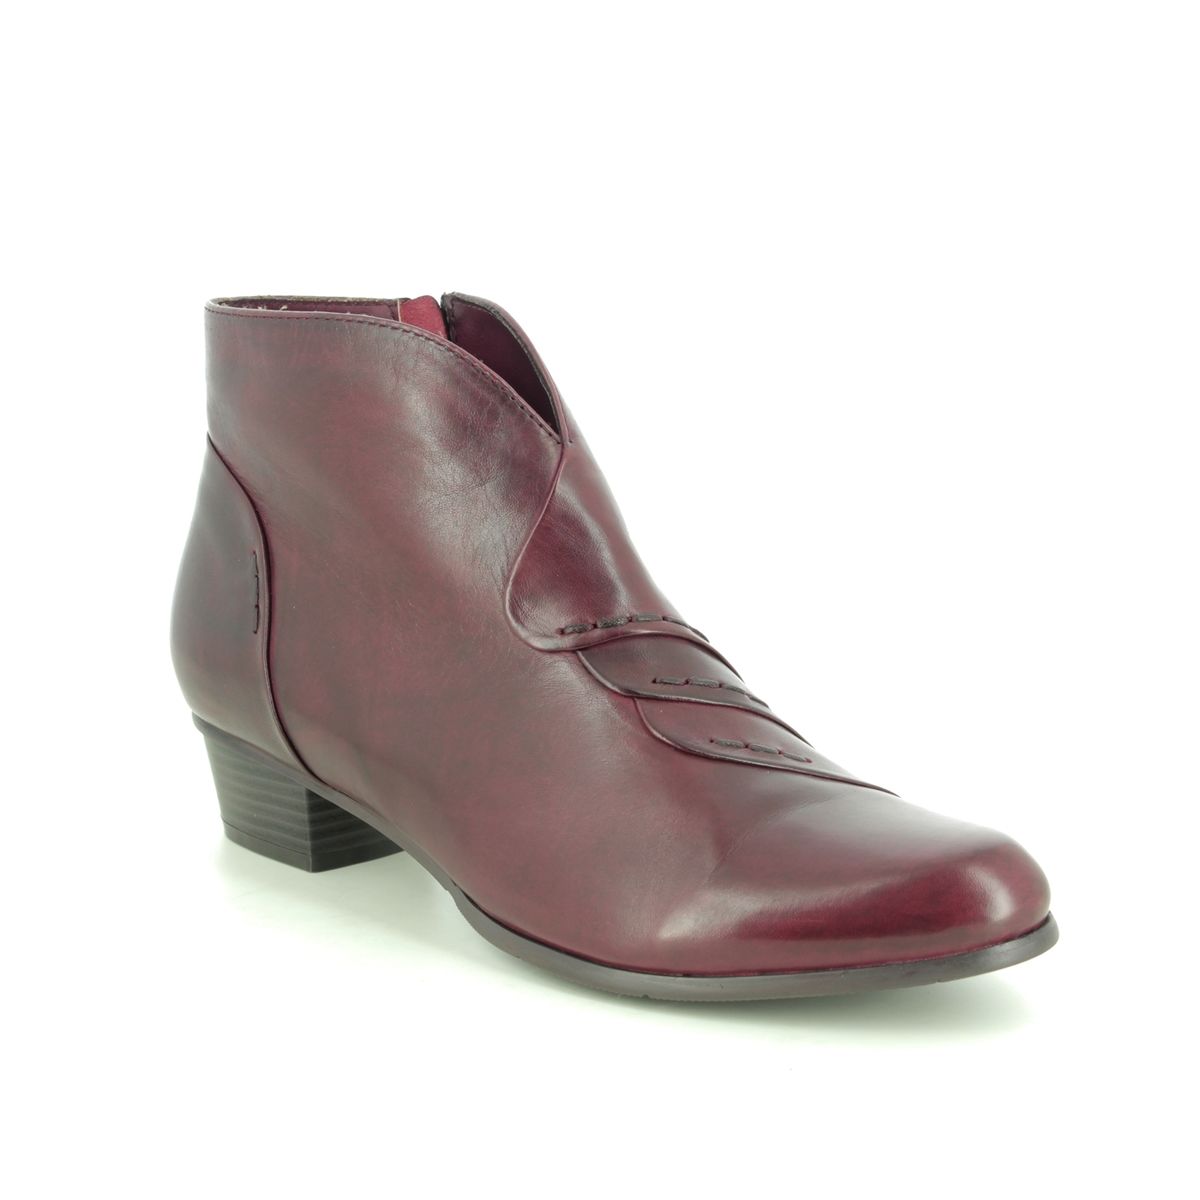 Regarde le Ciel Stefany 335 Wine leather Womens Ankle Boots 0335-008